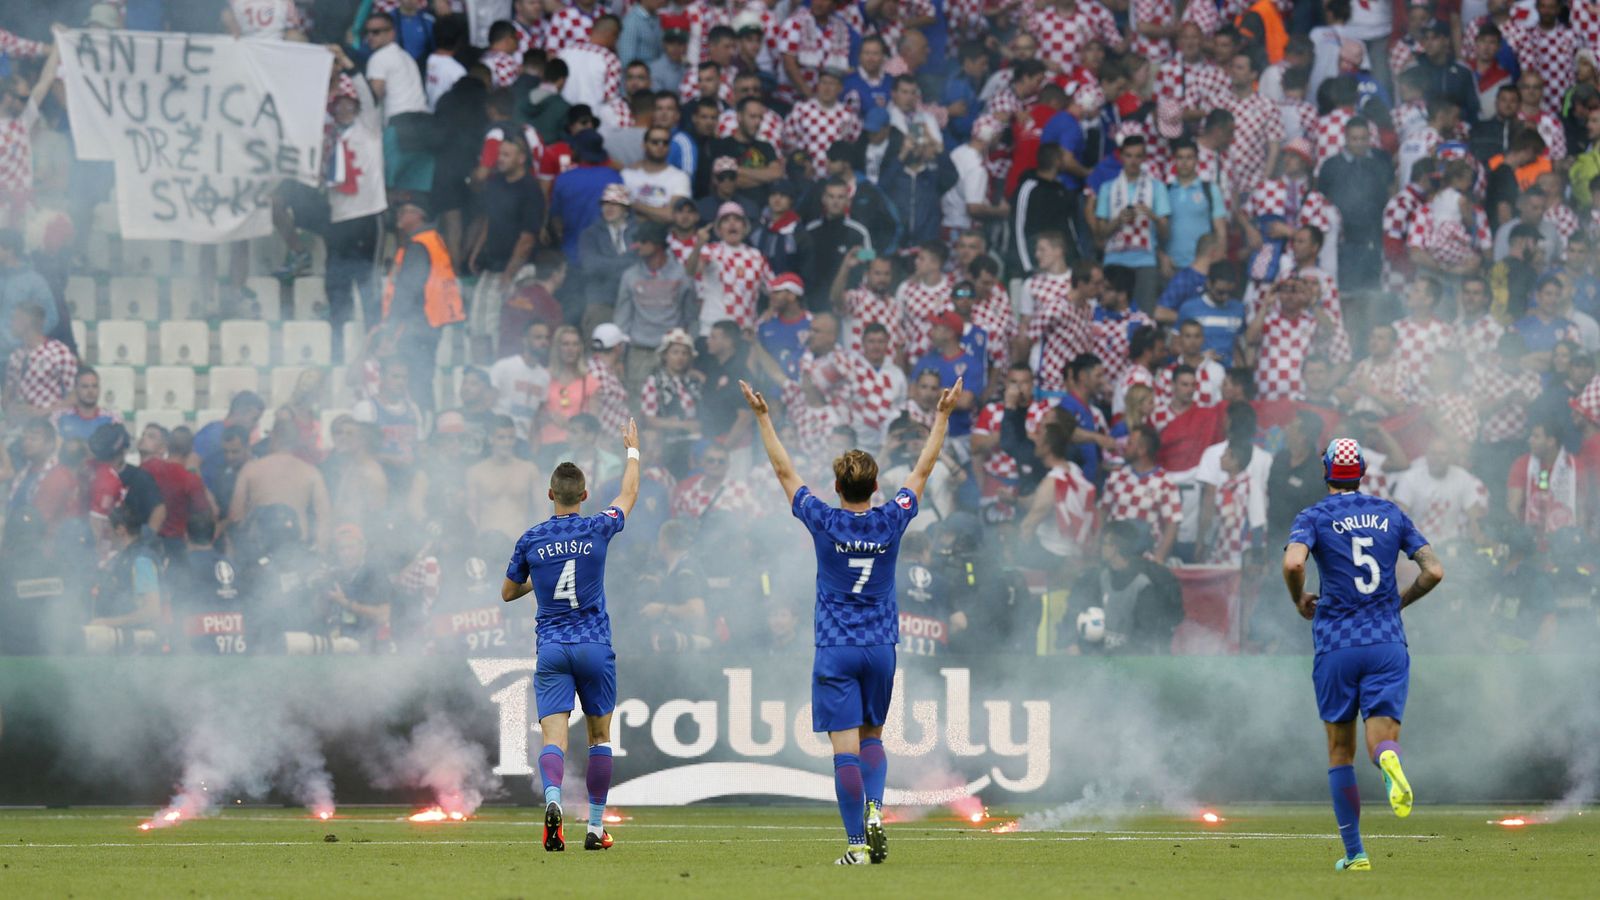 Foto: Croatia players gesture towards fans as flares are on the pitch